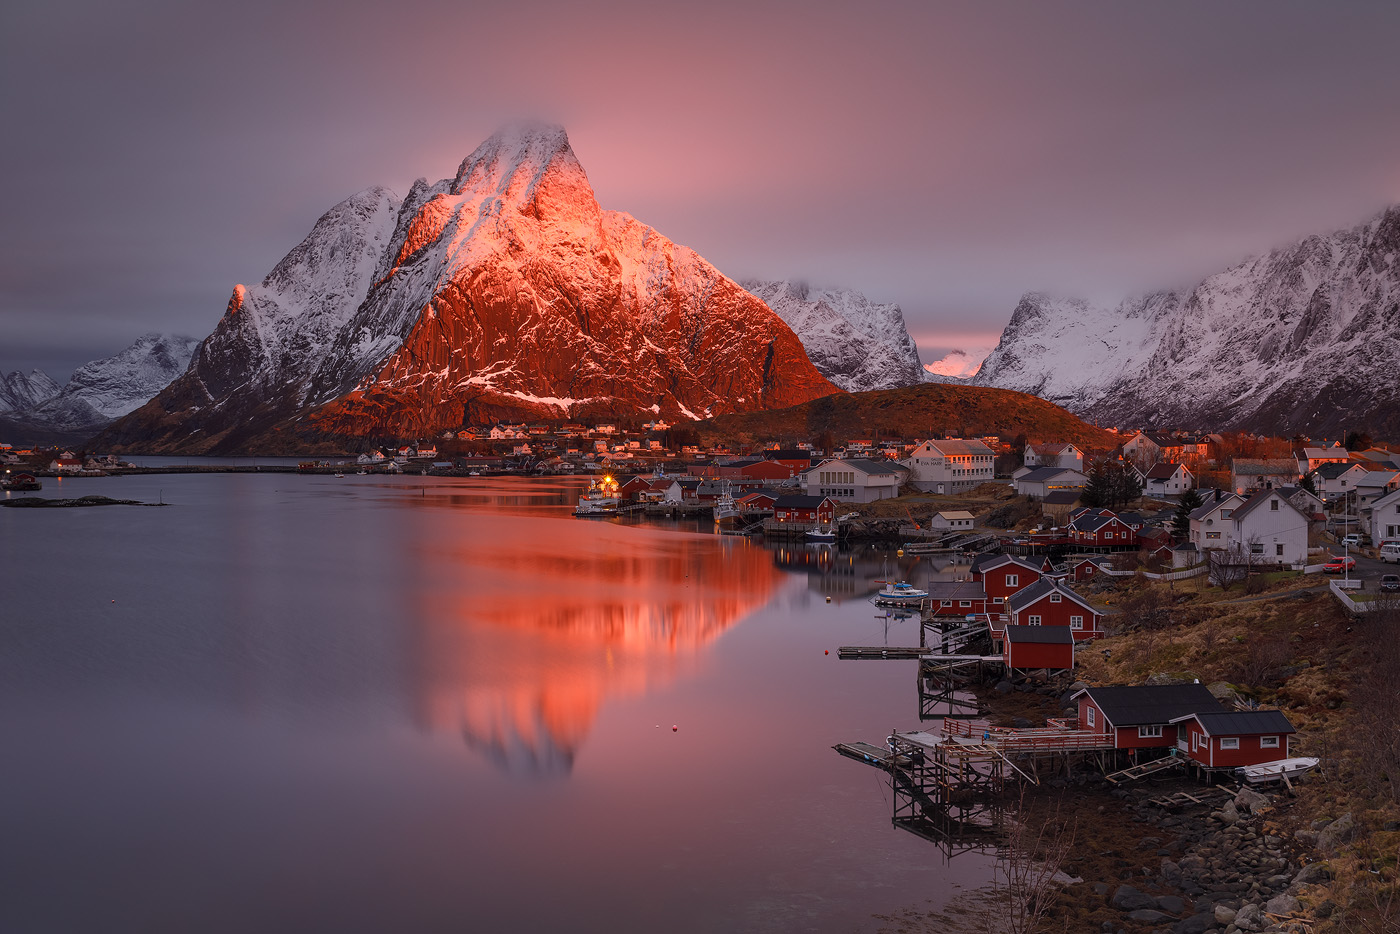 The famous viewpoint in Reine, the Lofoten Islands, Arctic Norway. Light: awesome. Originality: 0/10. Art? Not by a longshot. <br>Canon EOS 5D Mark IV, Tamron 24–70mm, f/11, 25 sec, ISO 100 <br>Reine, The Lofoten Islands, Arctic Norway